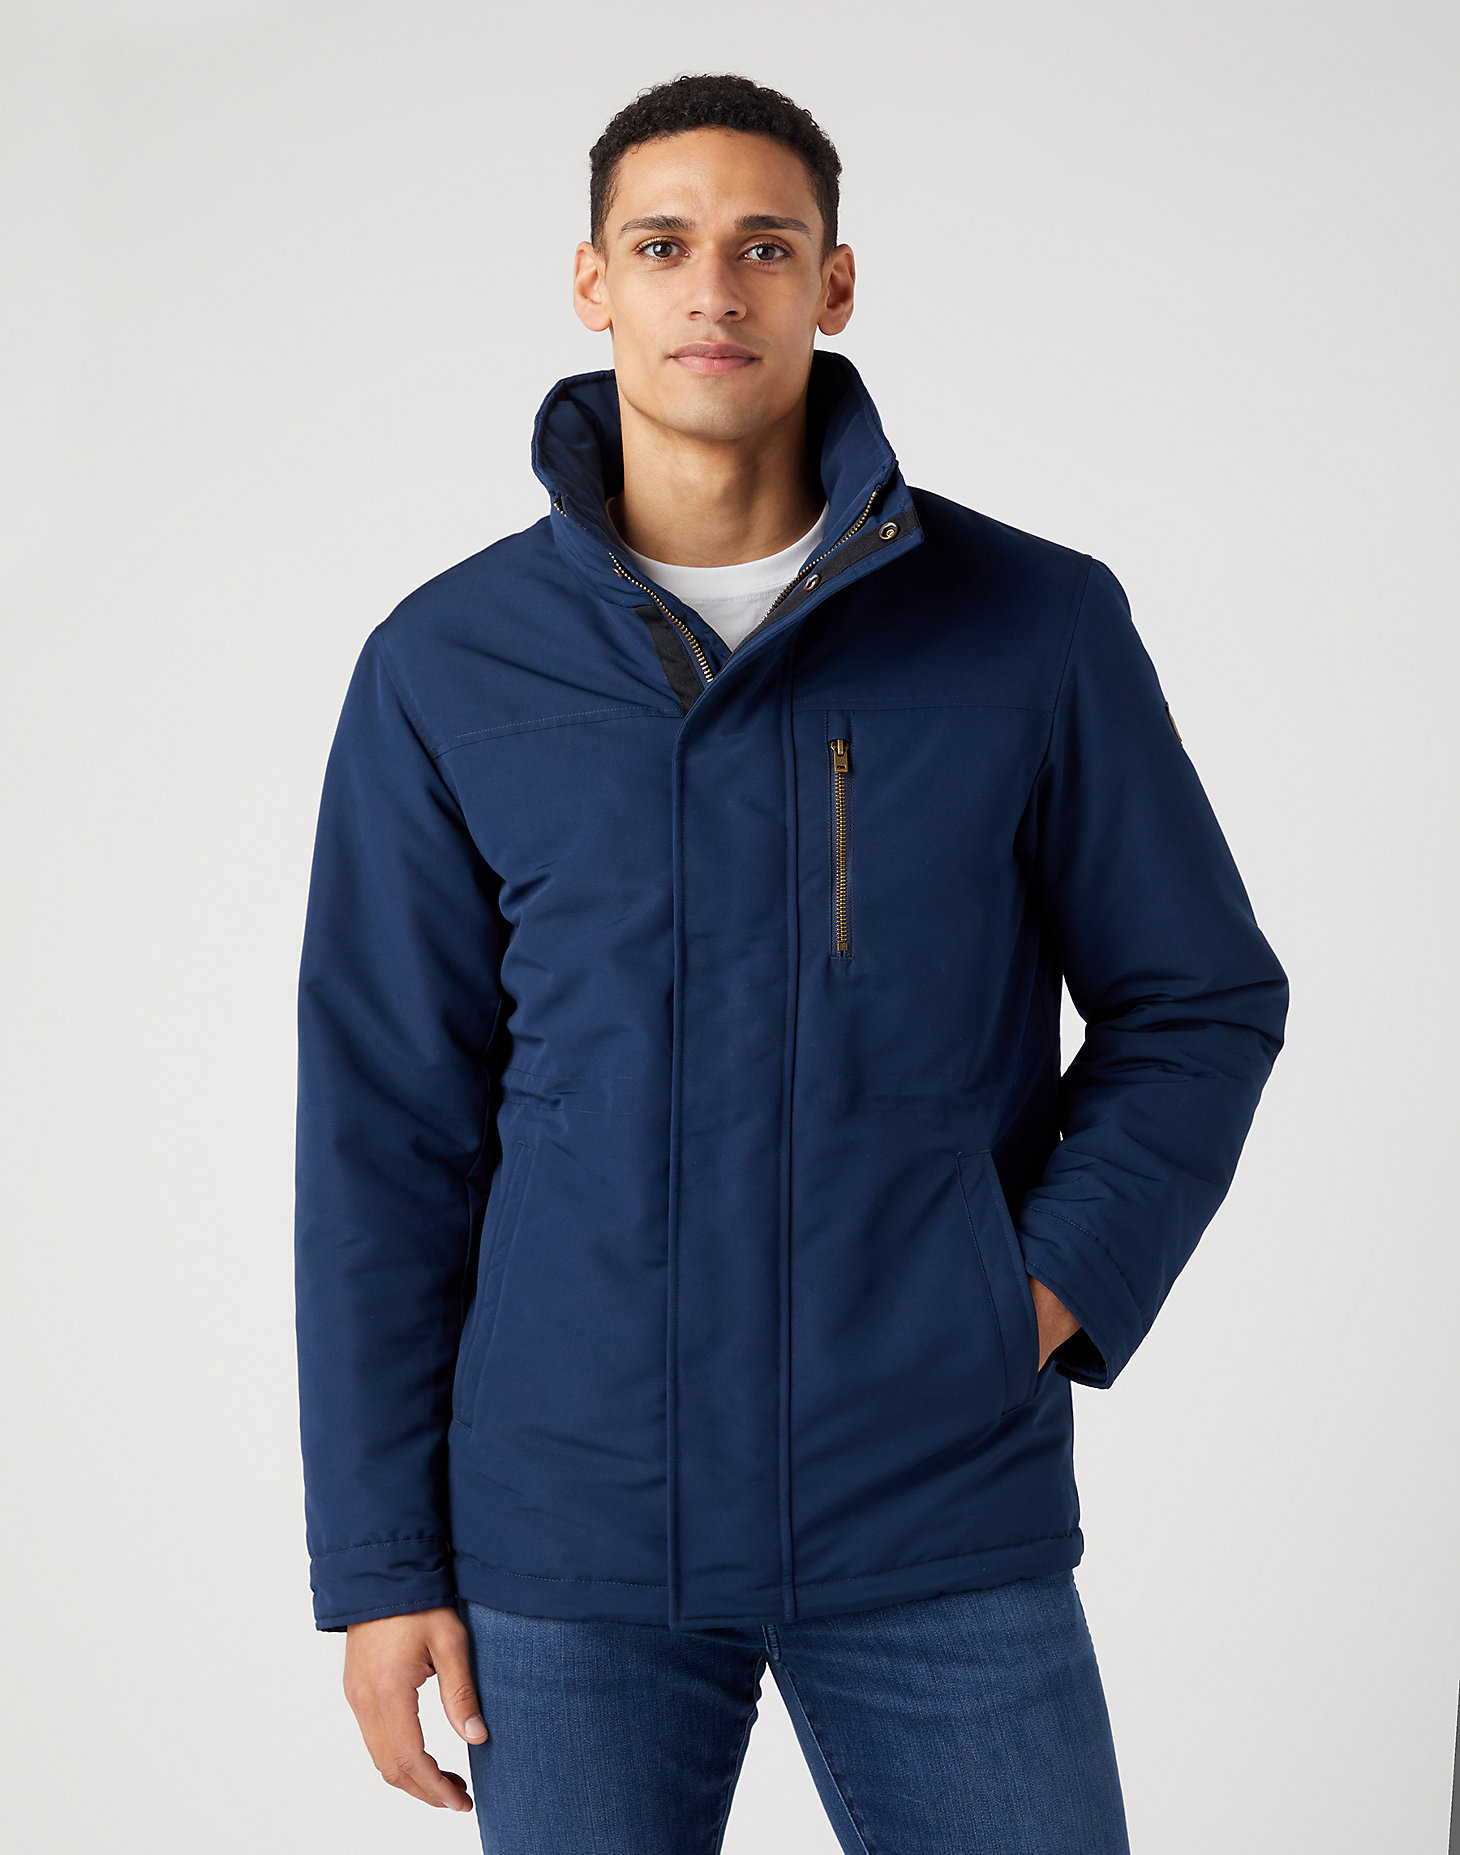 Bodyguard Jacket in Navy main view